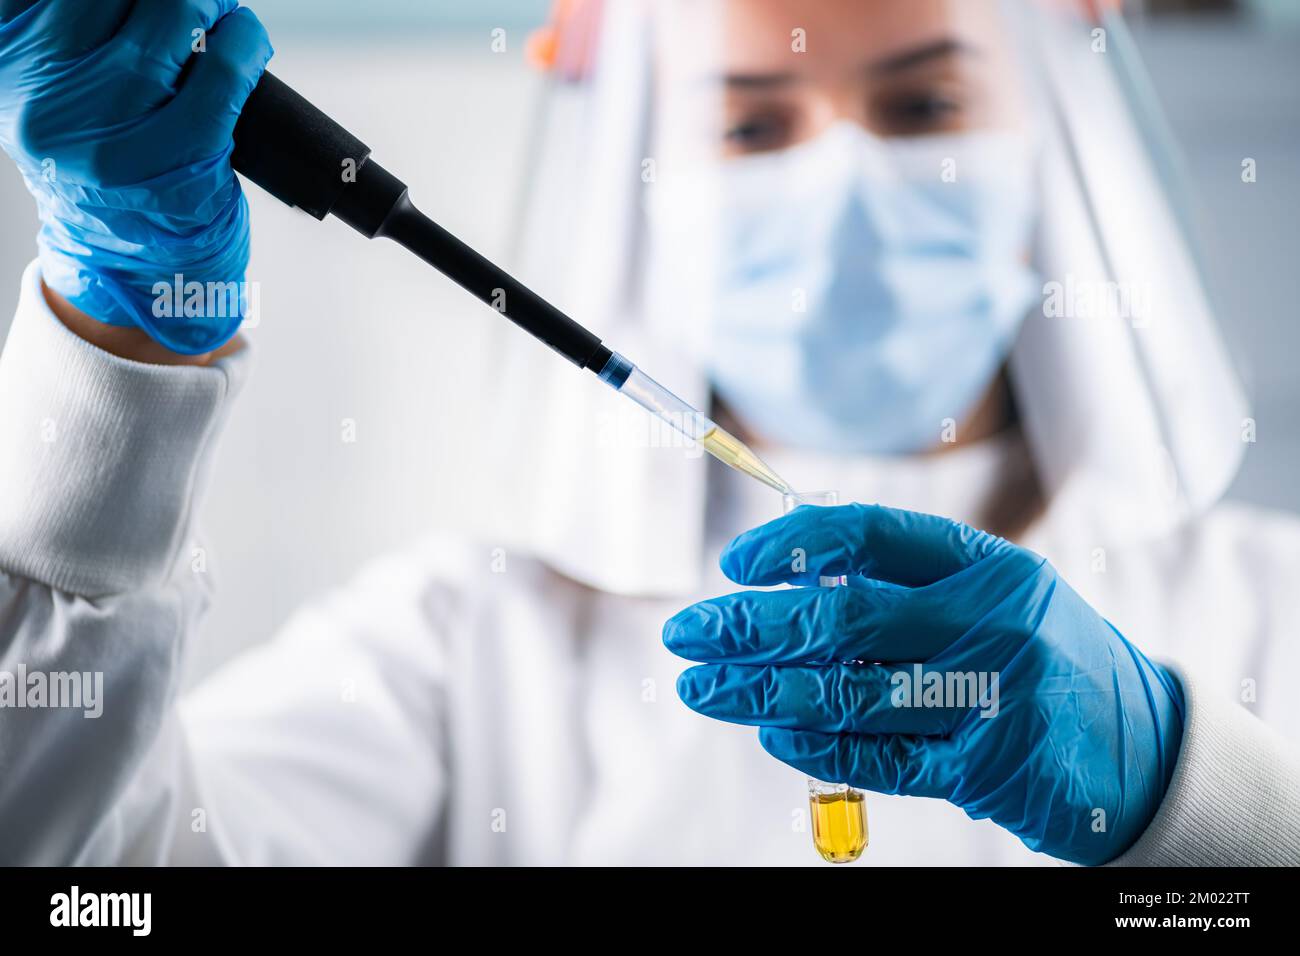 Researcher pipetting a sample. Stock Photo